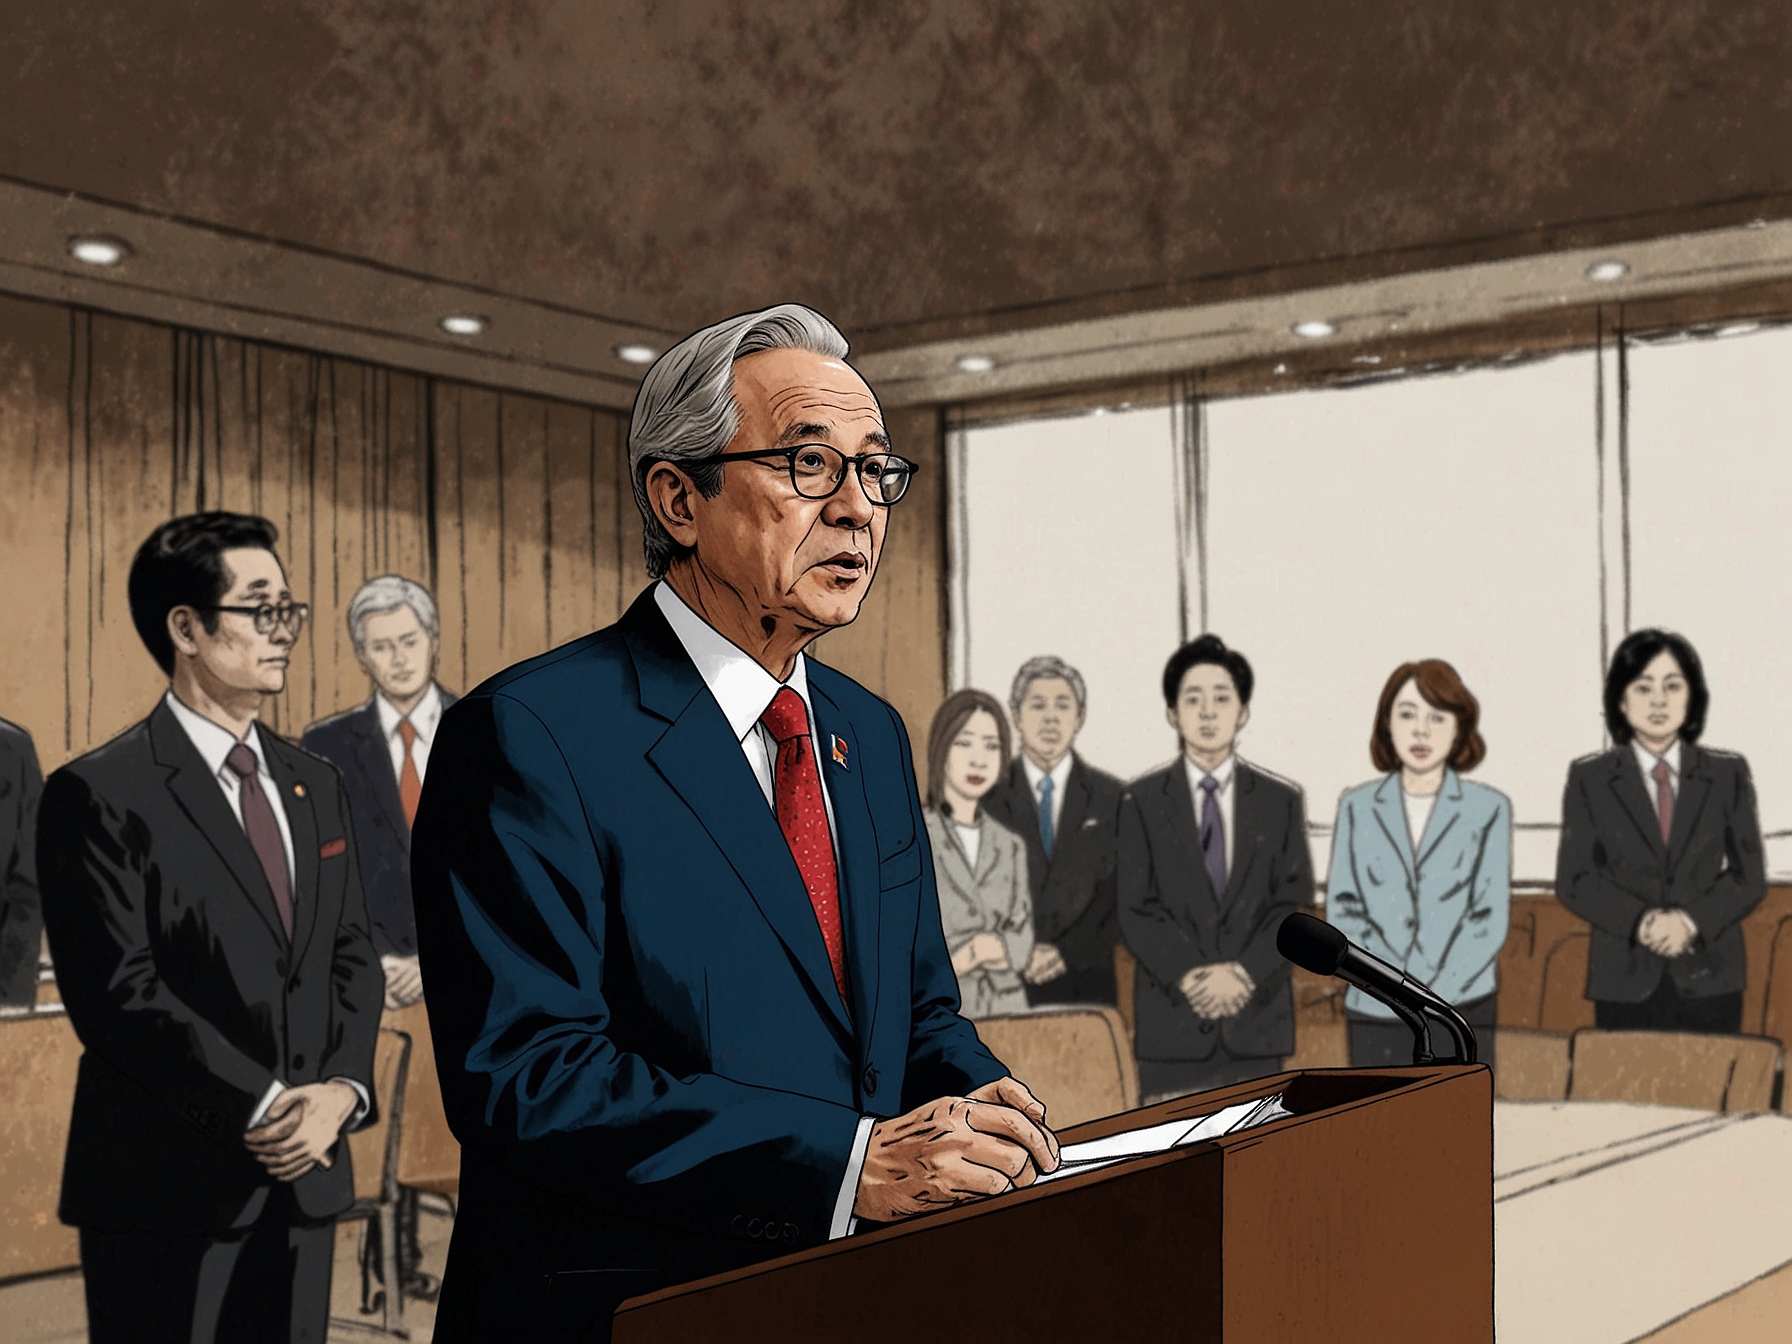 Prime Minister Christopher Luxon speaks at a press conference in Japan, addressing the media on the delayed arrival of the trade delegation due to aircraft complications.